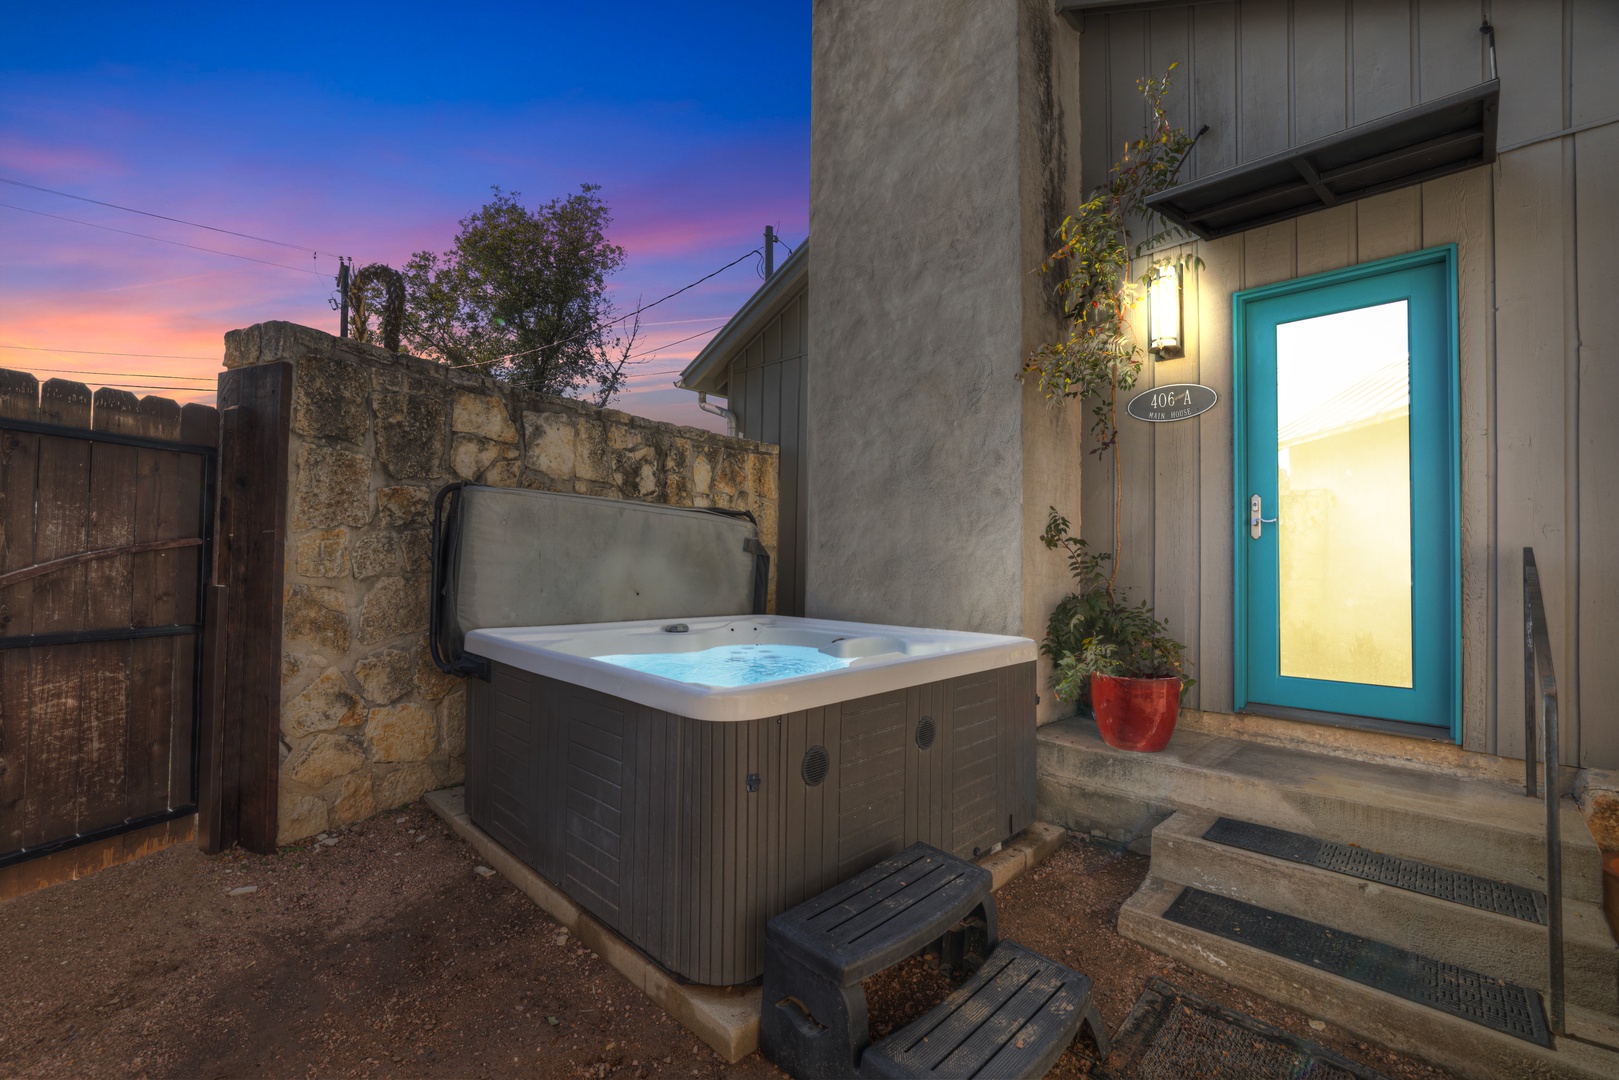 406 Lodge-A: Hot-Tub & 2 Blks to Main St.